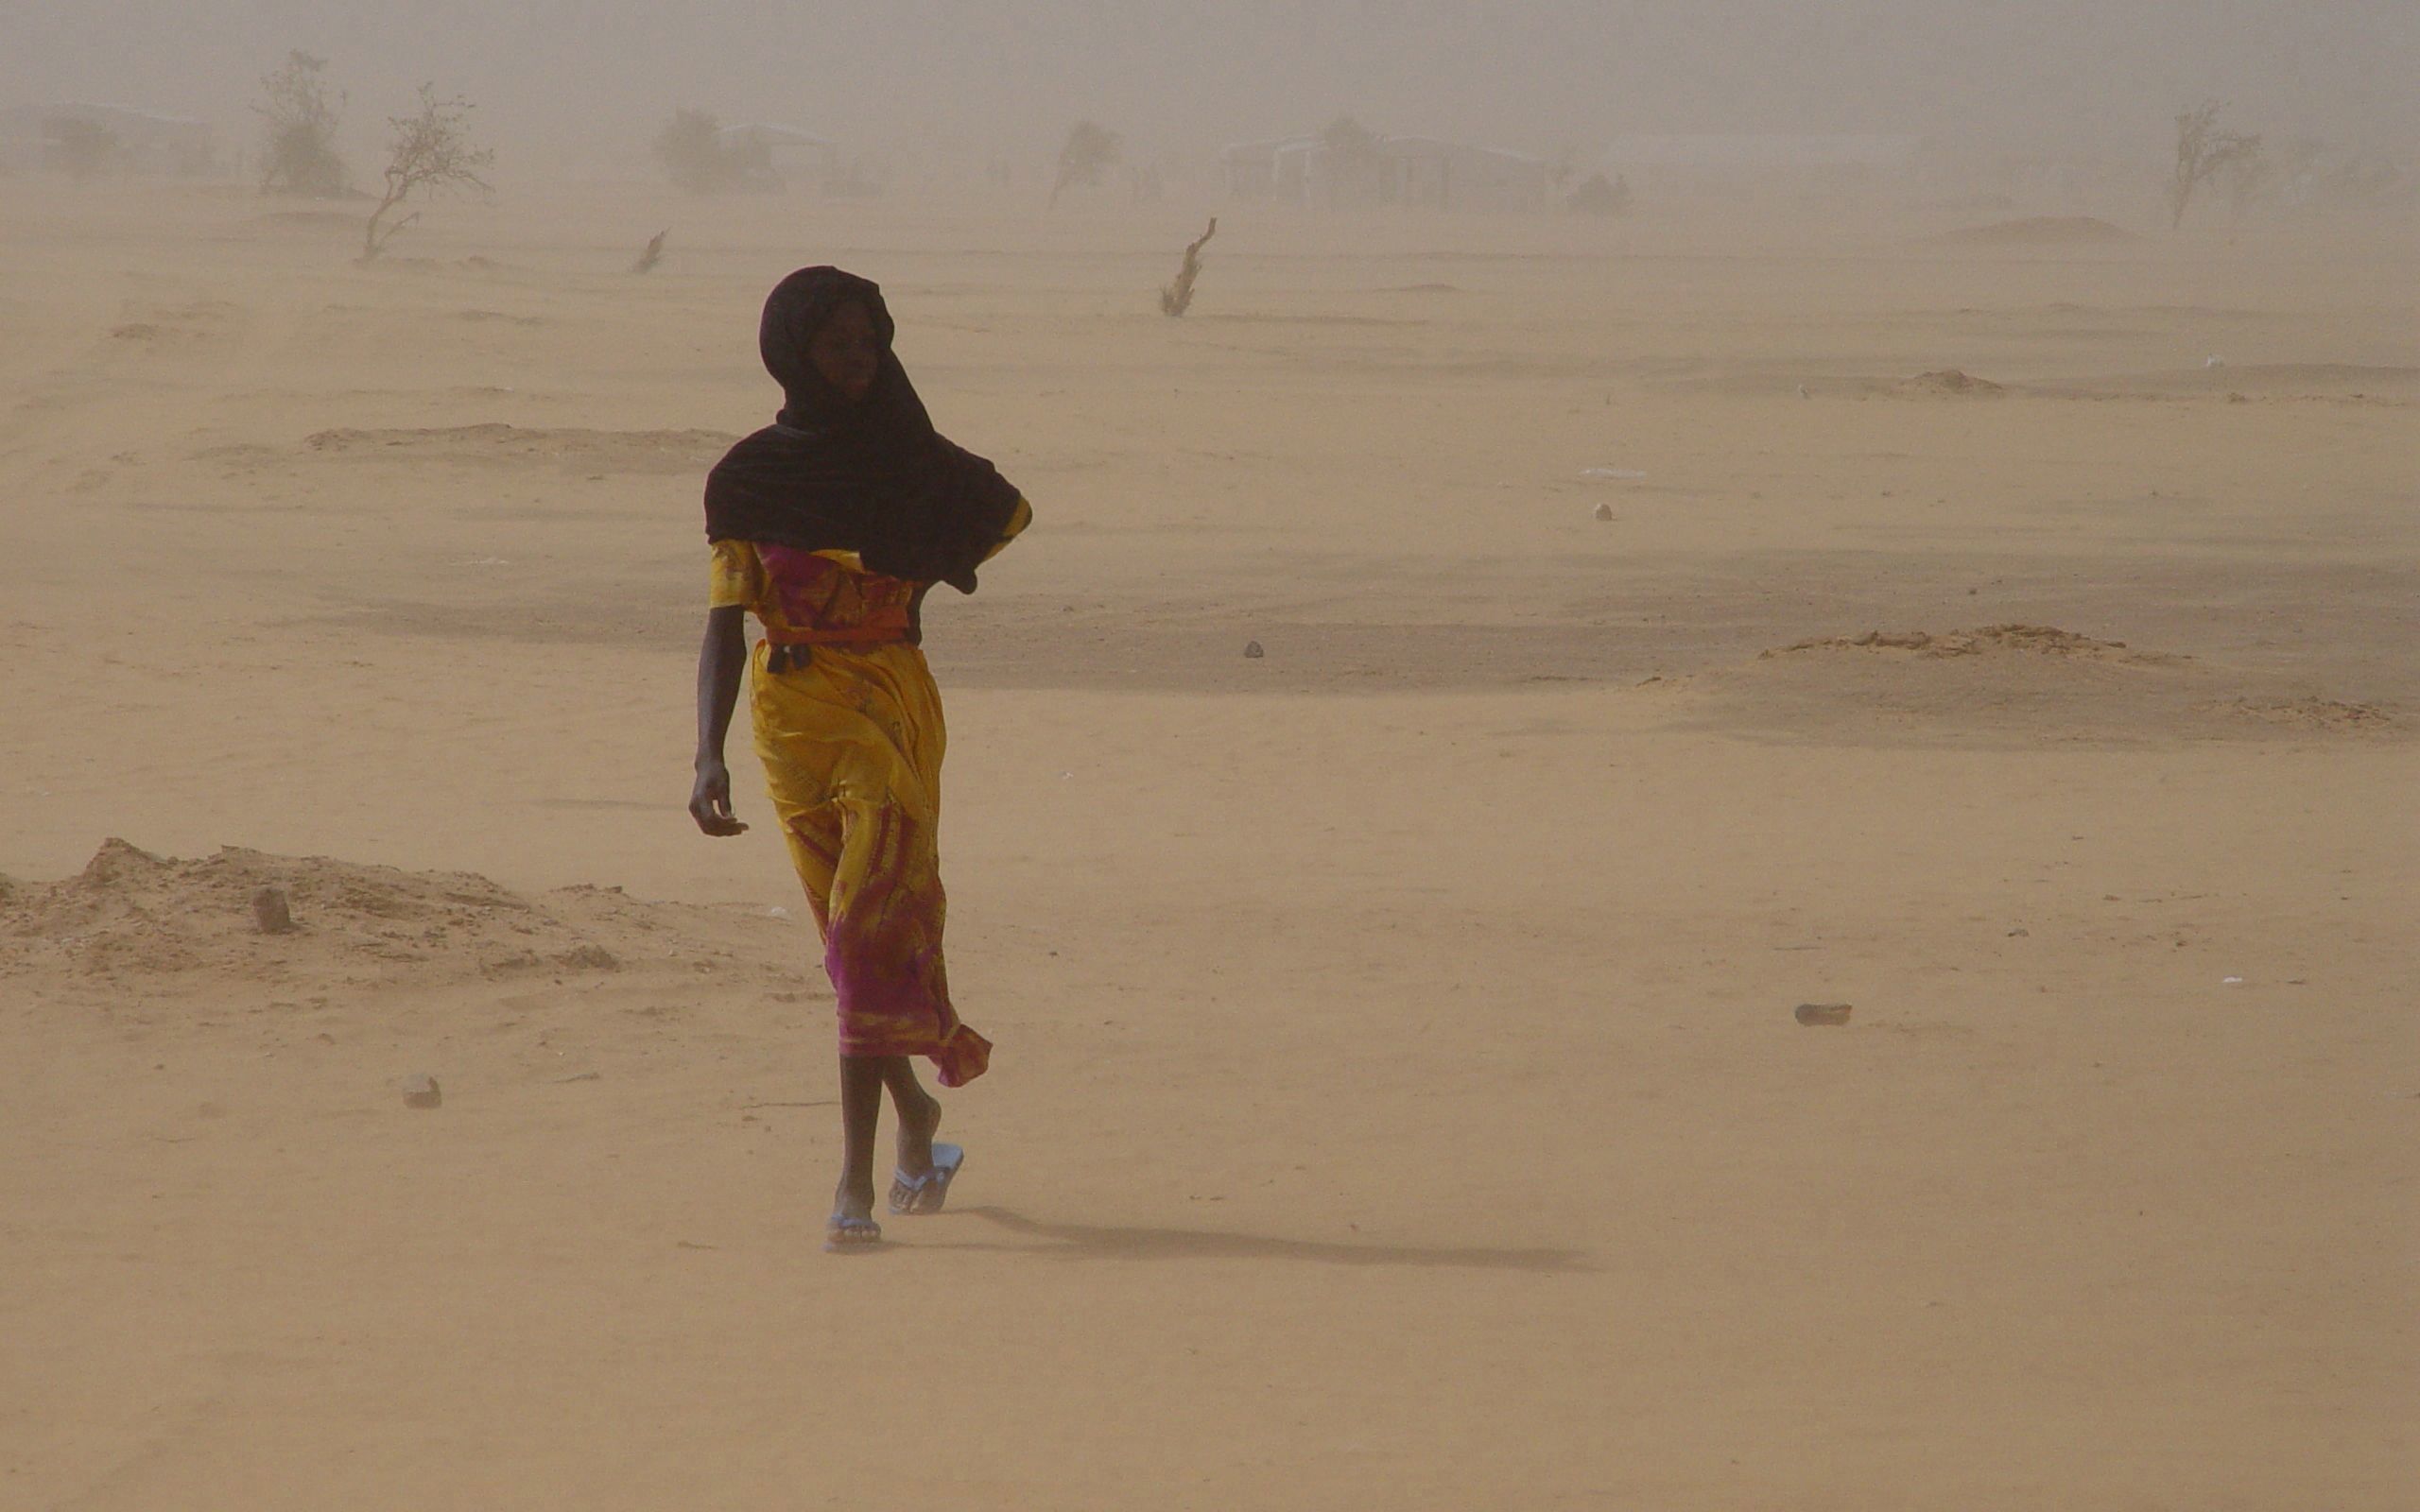 Solitary woman, eastern Chad